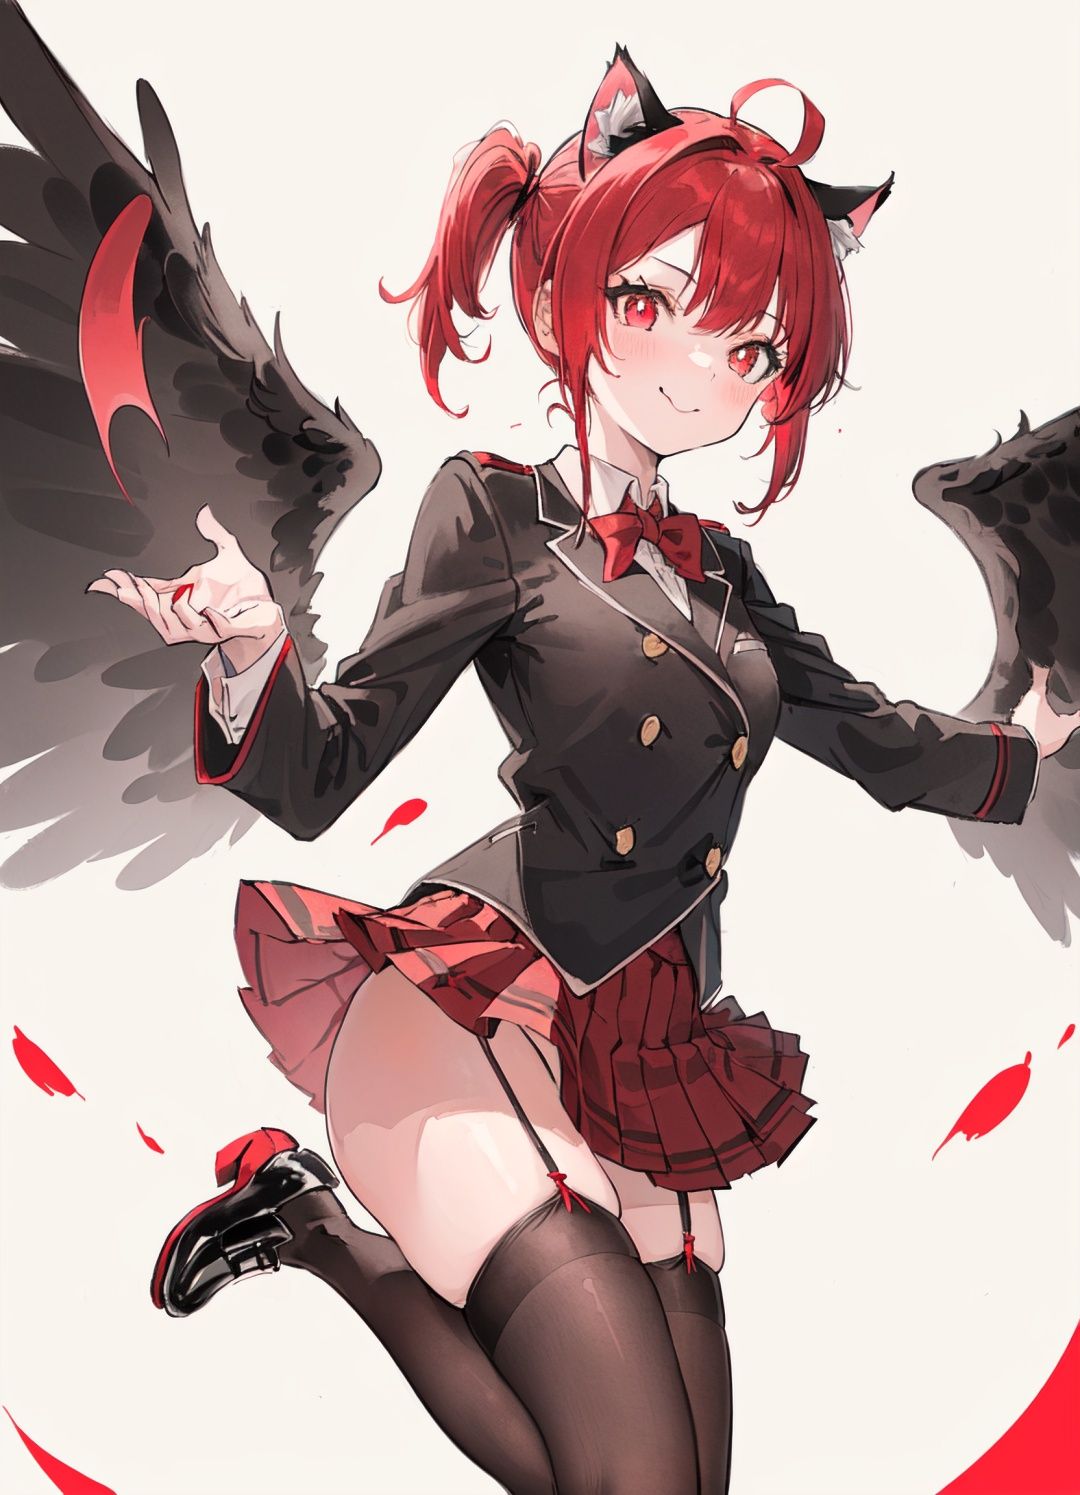 1 girl + red hair + cat ears + silly hair type + red pupil + (delicate features:1.2) +jk uniform + skirt + black stockings + beautiful shoes + a hand covering the mouth + wings + sexy + cute + school + a playful smile